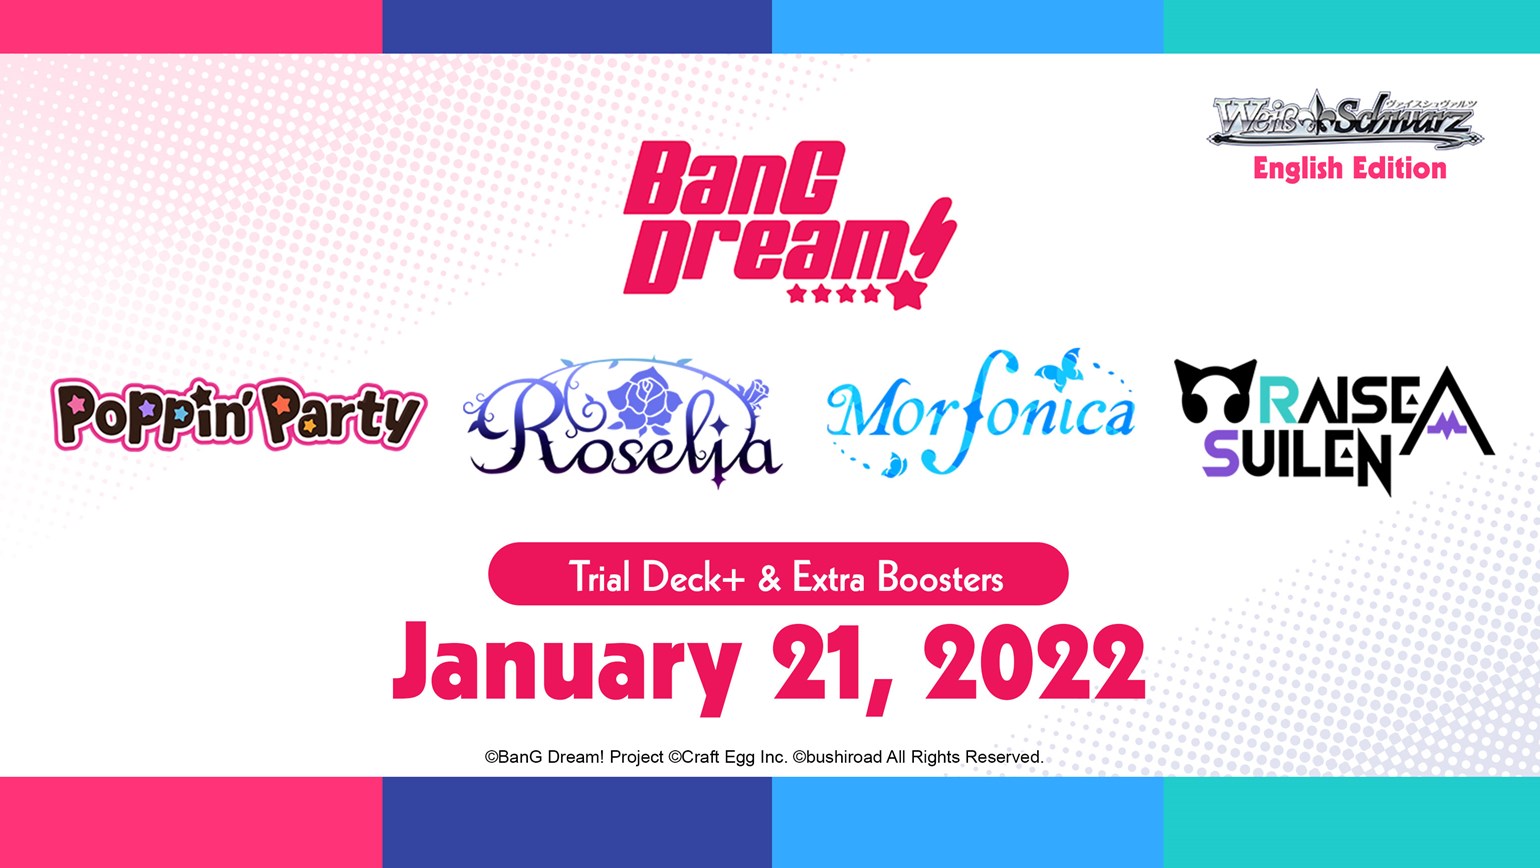 Weiss Schwarz: It’s a girls band party this January!